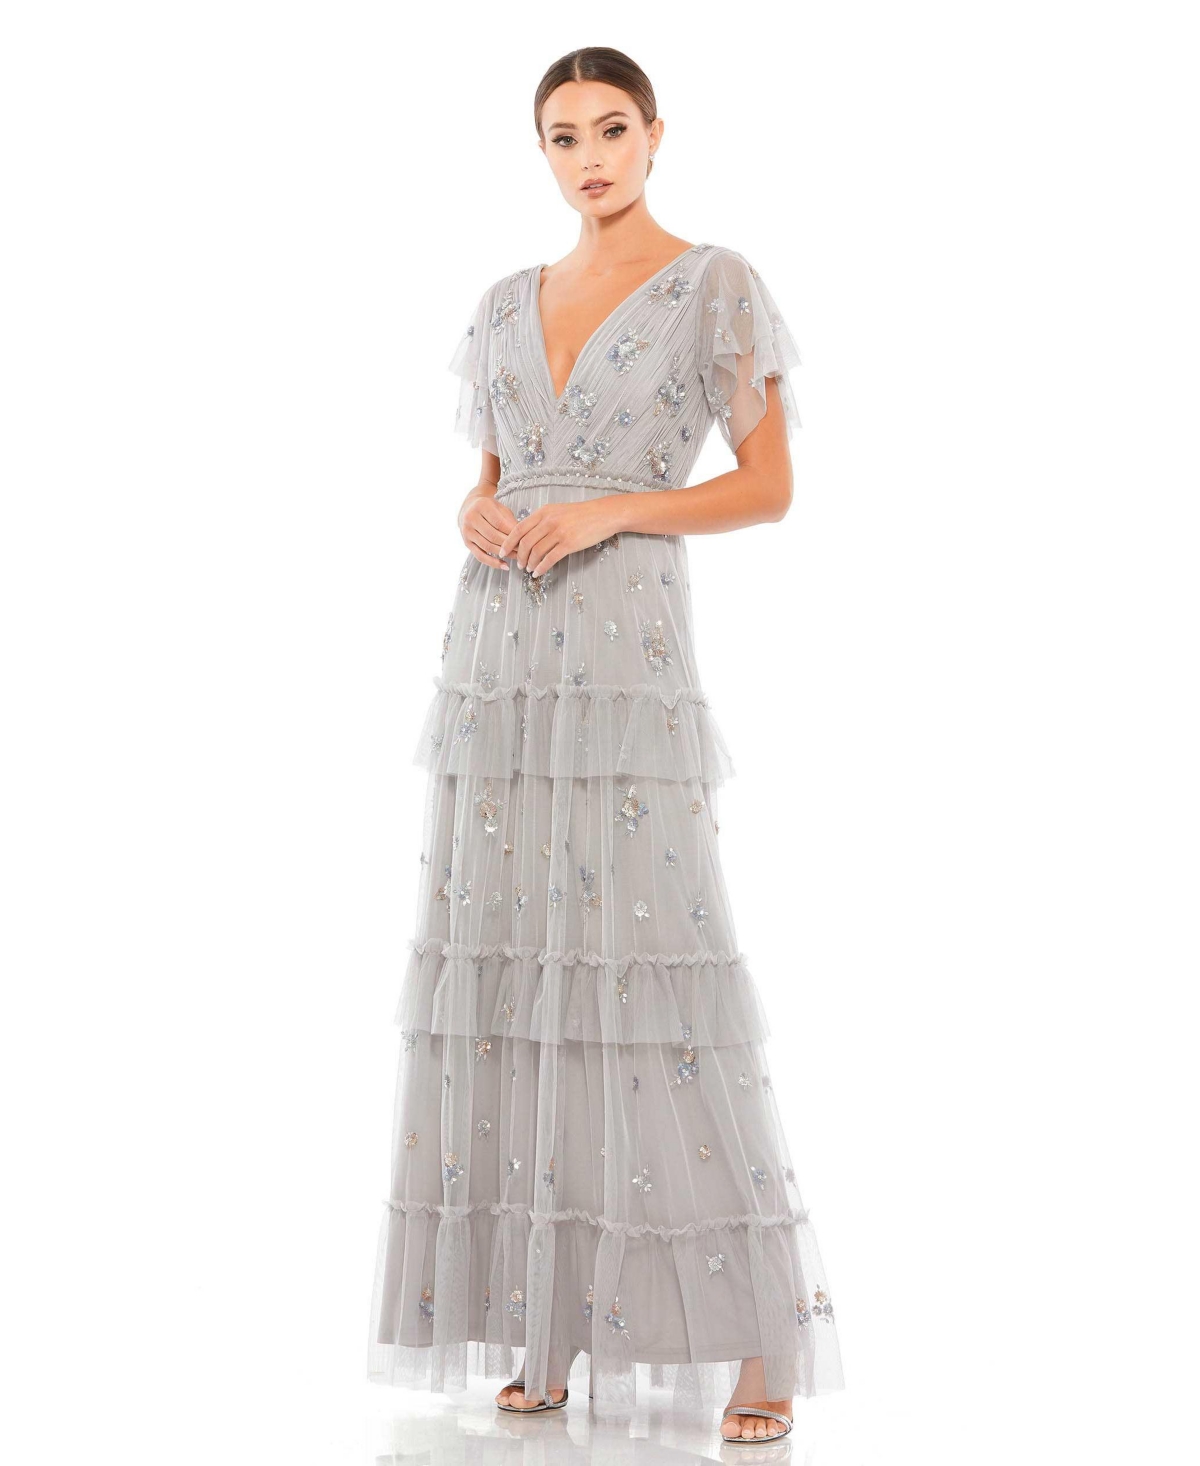 1920s Downton Abbey Dresses Womens Ruffle Tiered Embellished Flutter Sleeve Gown - Platinum $598.00 AT vintagedancer.com